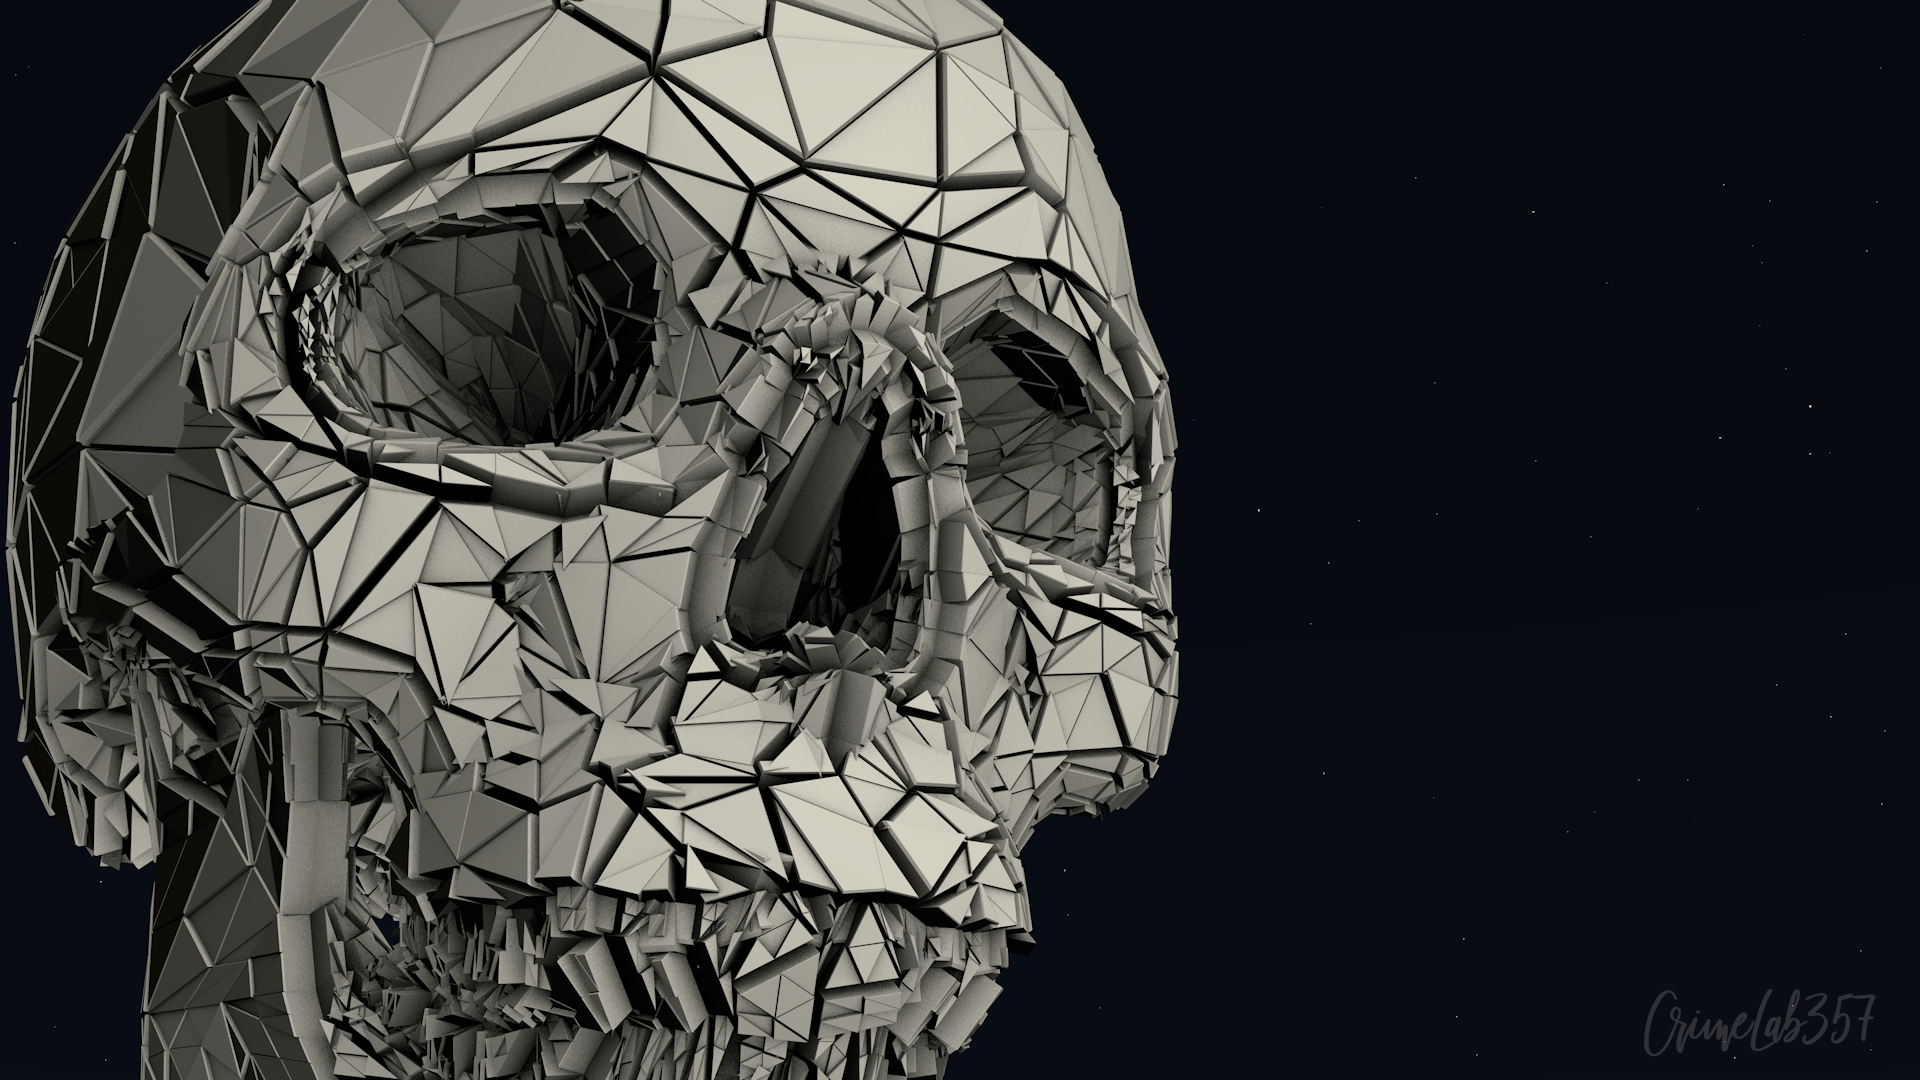 General 1920x1080 3D Abstract 3D fractal watermarked skull